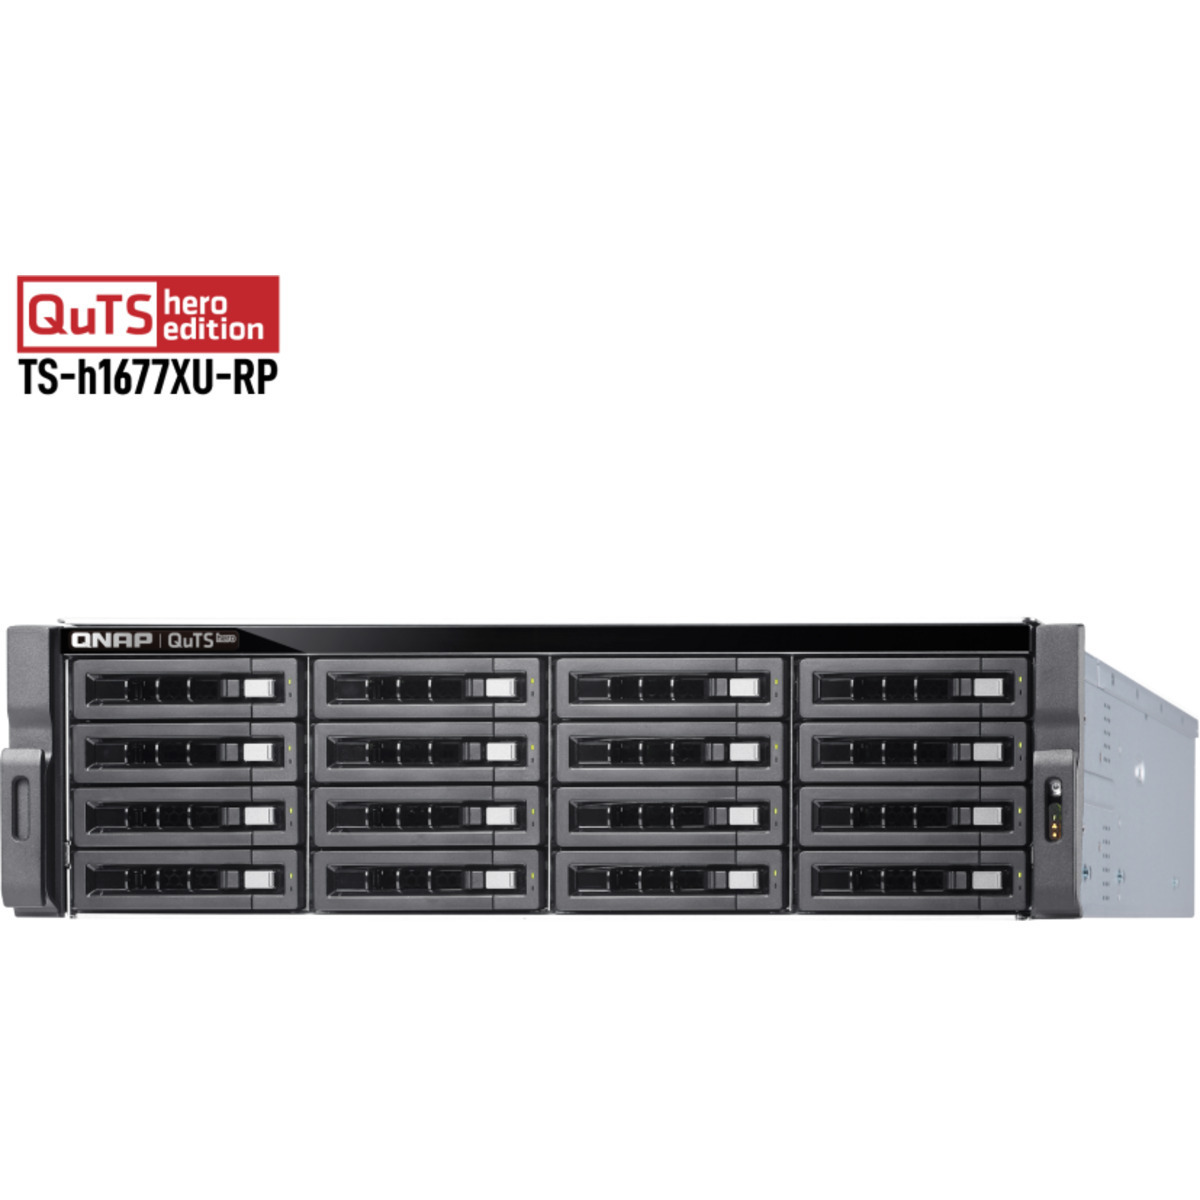 QNAP TS-h1677XU-RP QuTS hero Edition 140tb 16-Bay RackMount Large Business / Enterprise NAS - Network Attached Storage Device 14x10tb Seagate IronWolf Pro ST10000NT001 3.5 7200rpm SATA 6Gb/s HDD NAS Class Drives Installed - Burn-In Tested - ON SALE TS-h1677XU-RP QuTS hero Edition